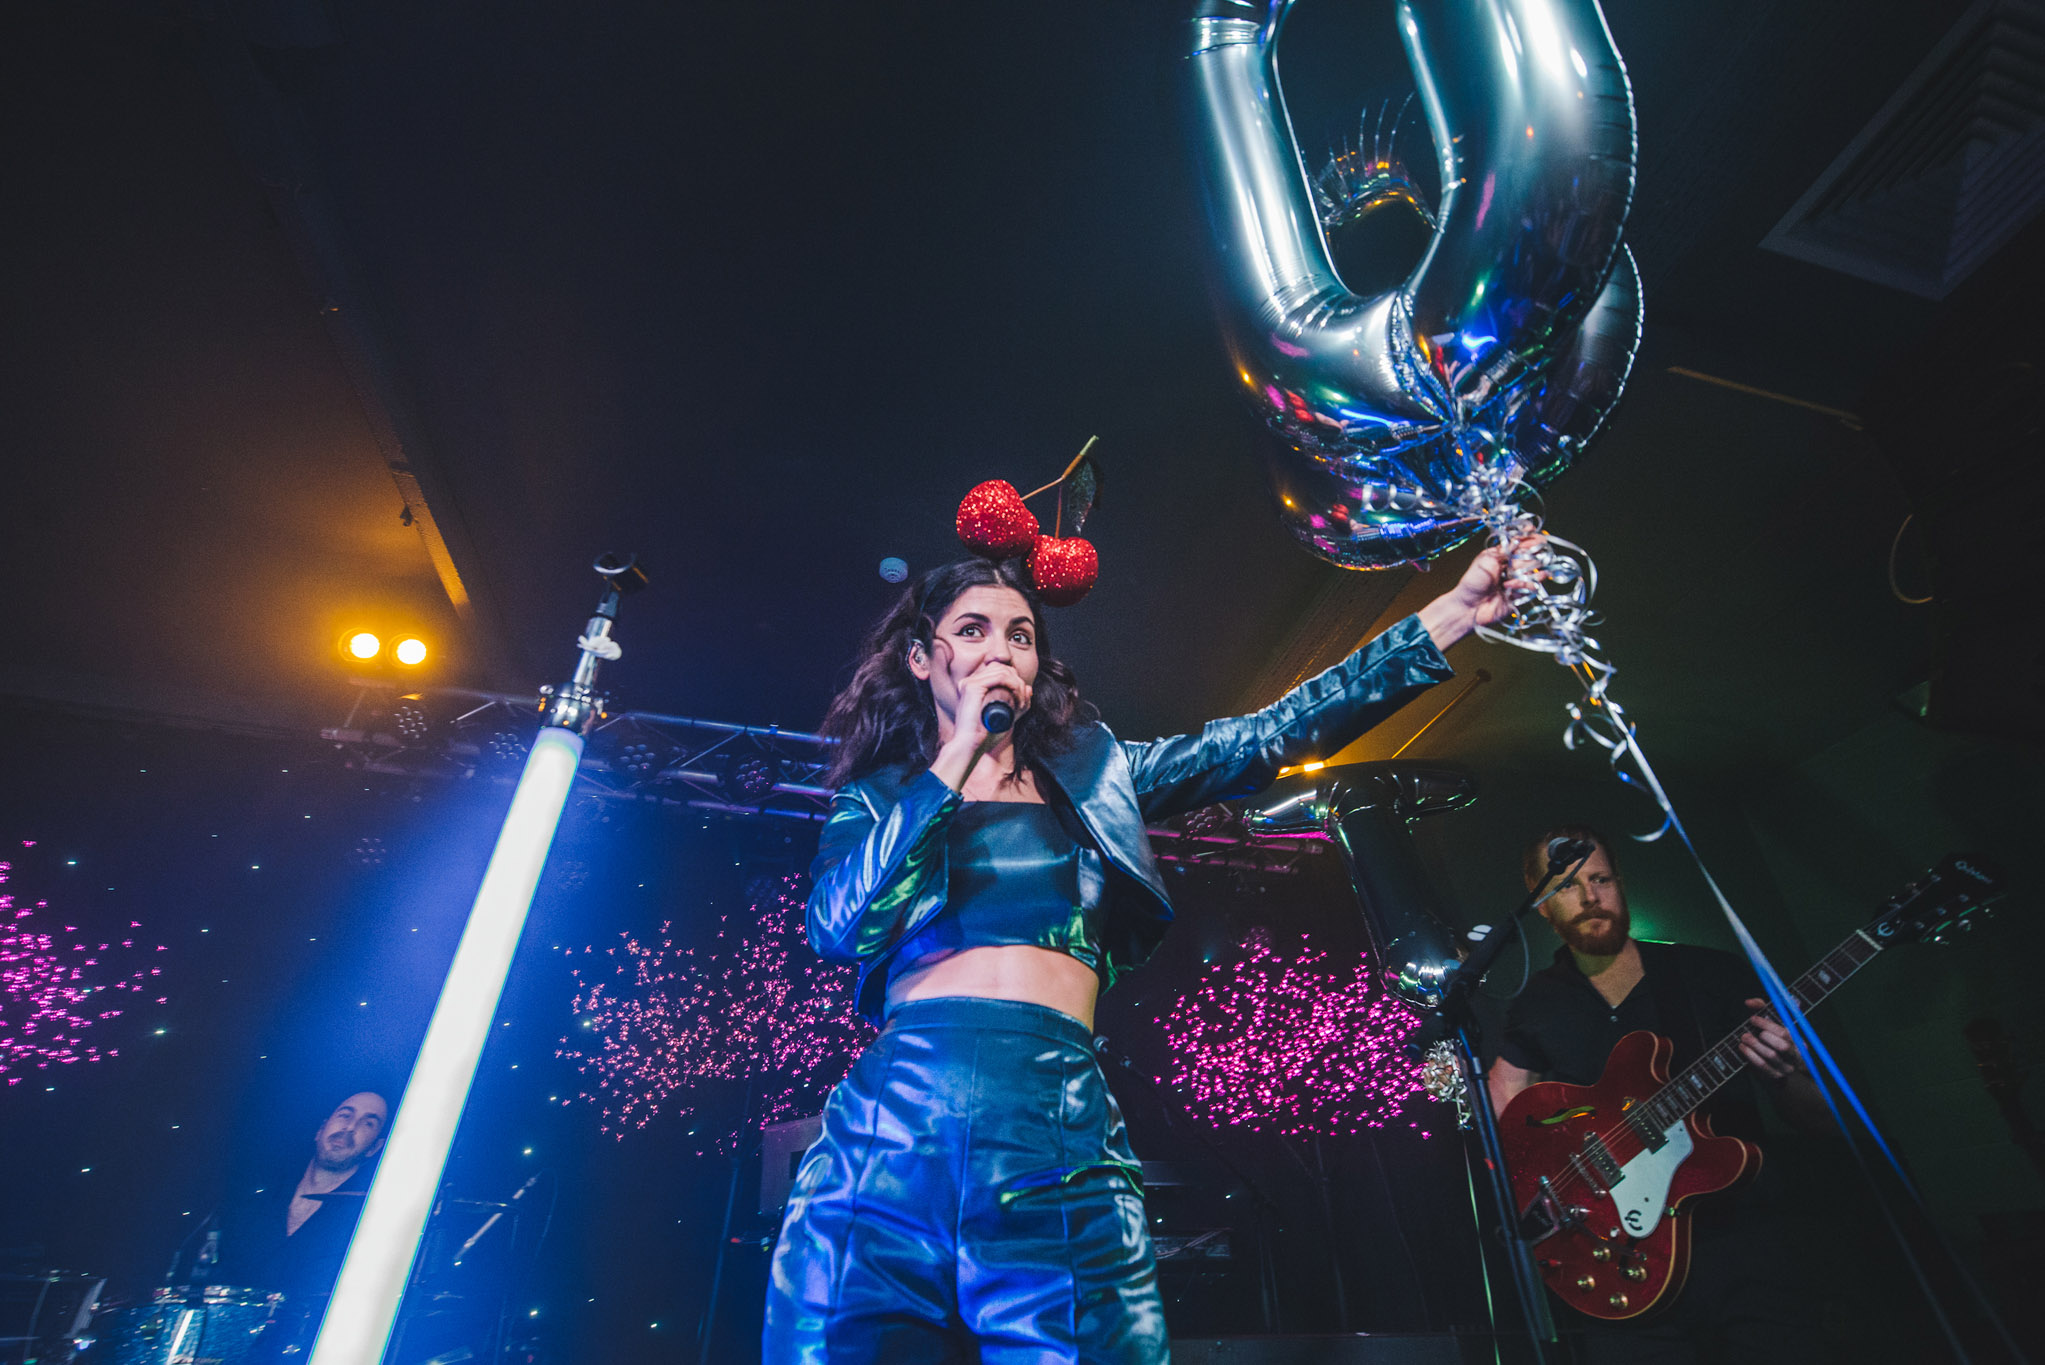 Marina and the Diamonds gets frooty at tiny DIY show